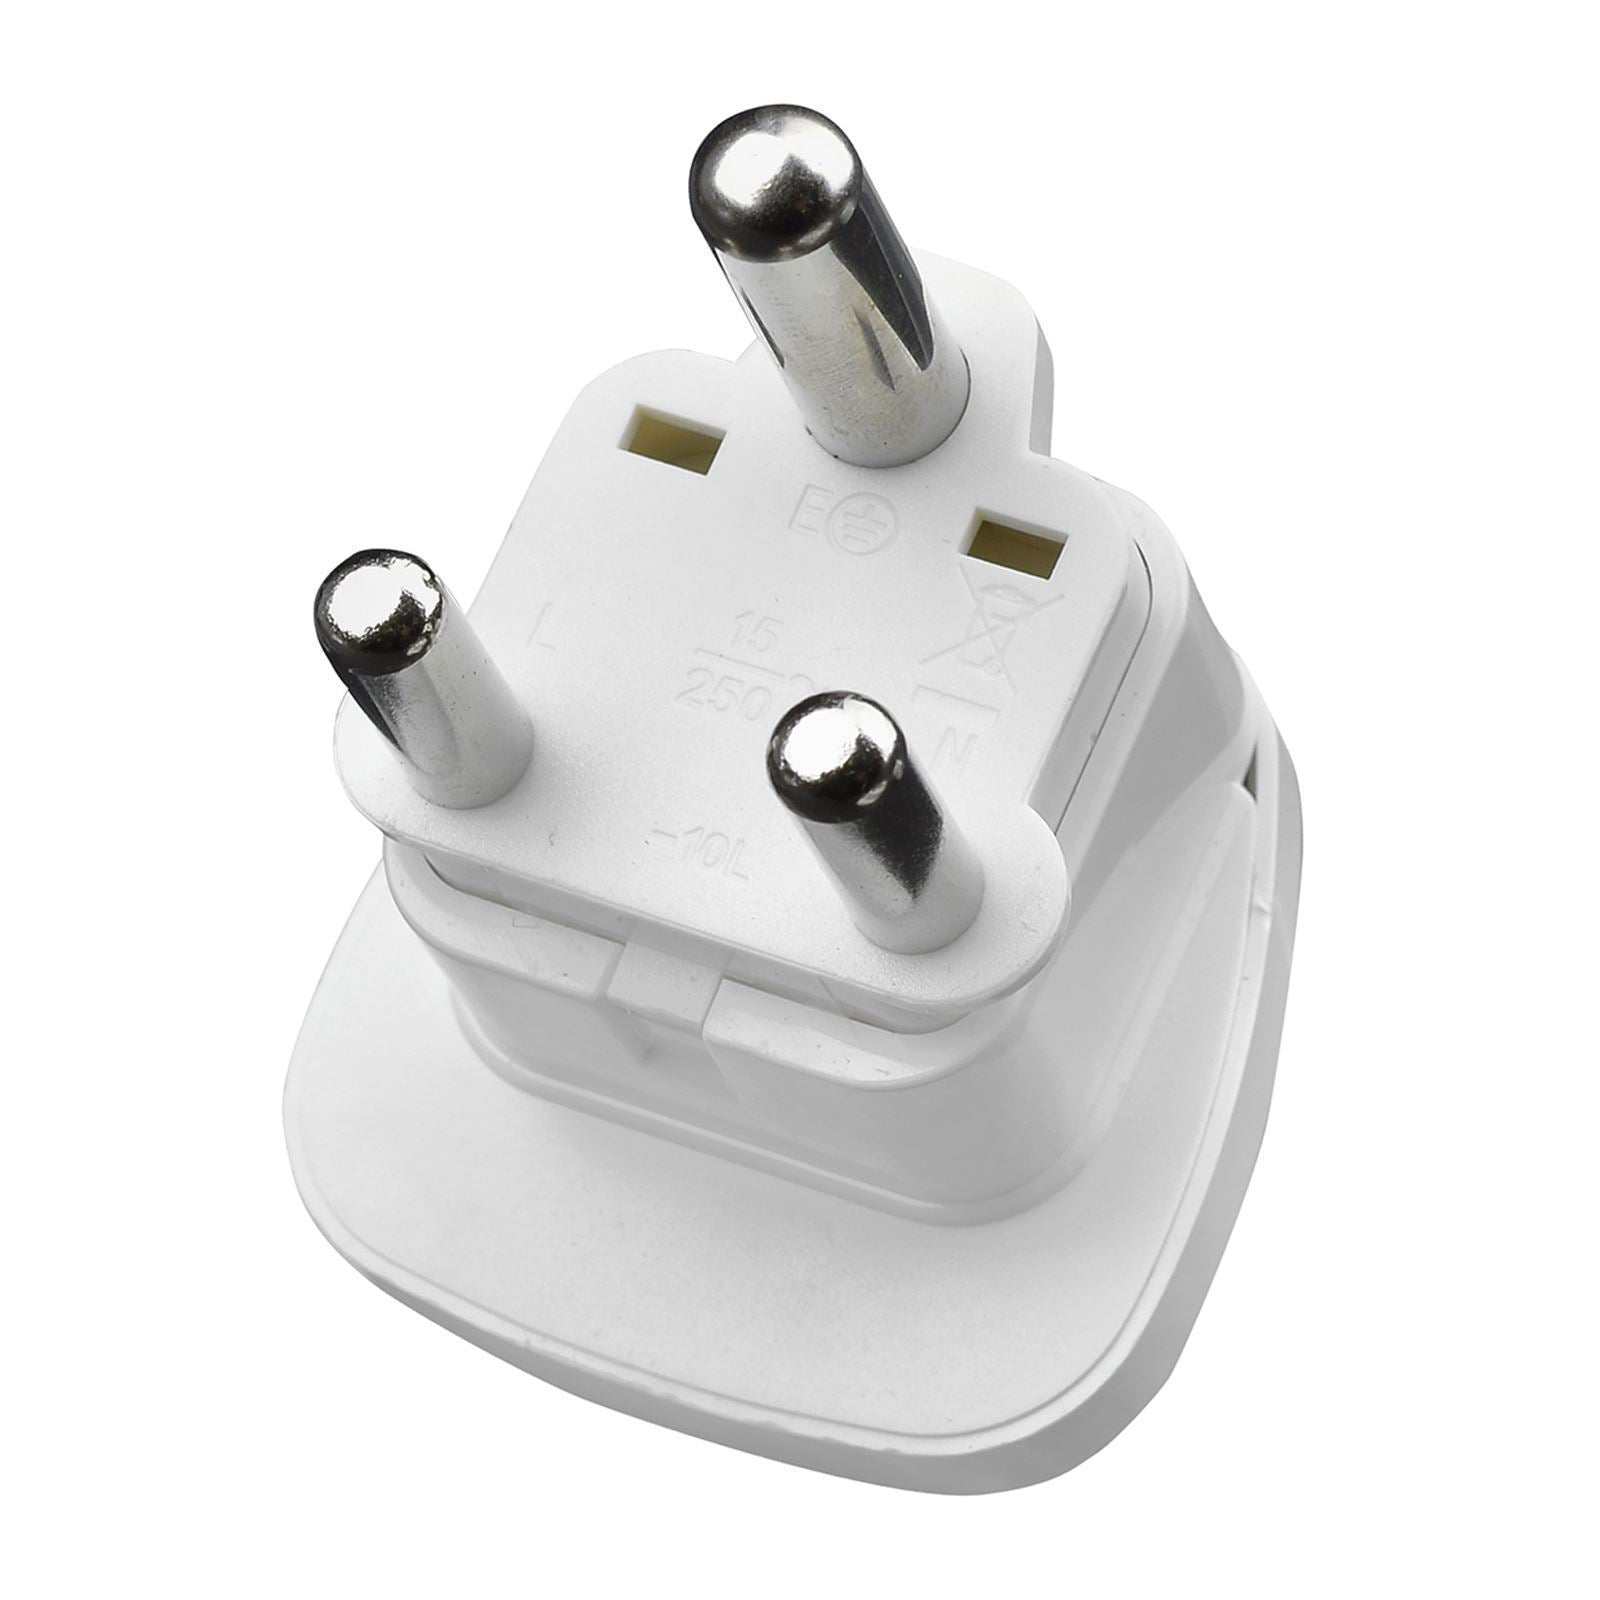 AMOS South Africa Travel Adapter